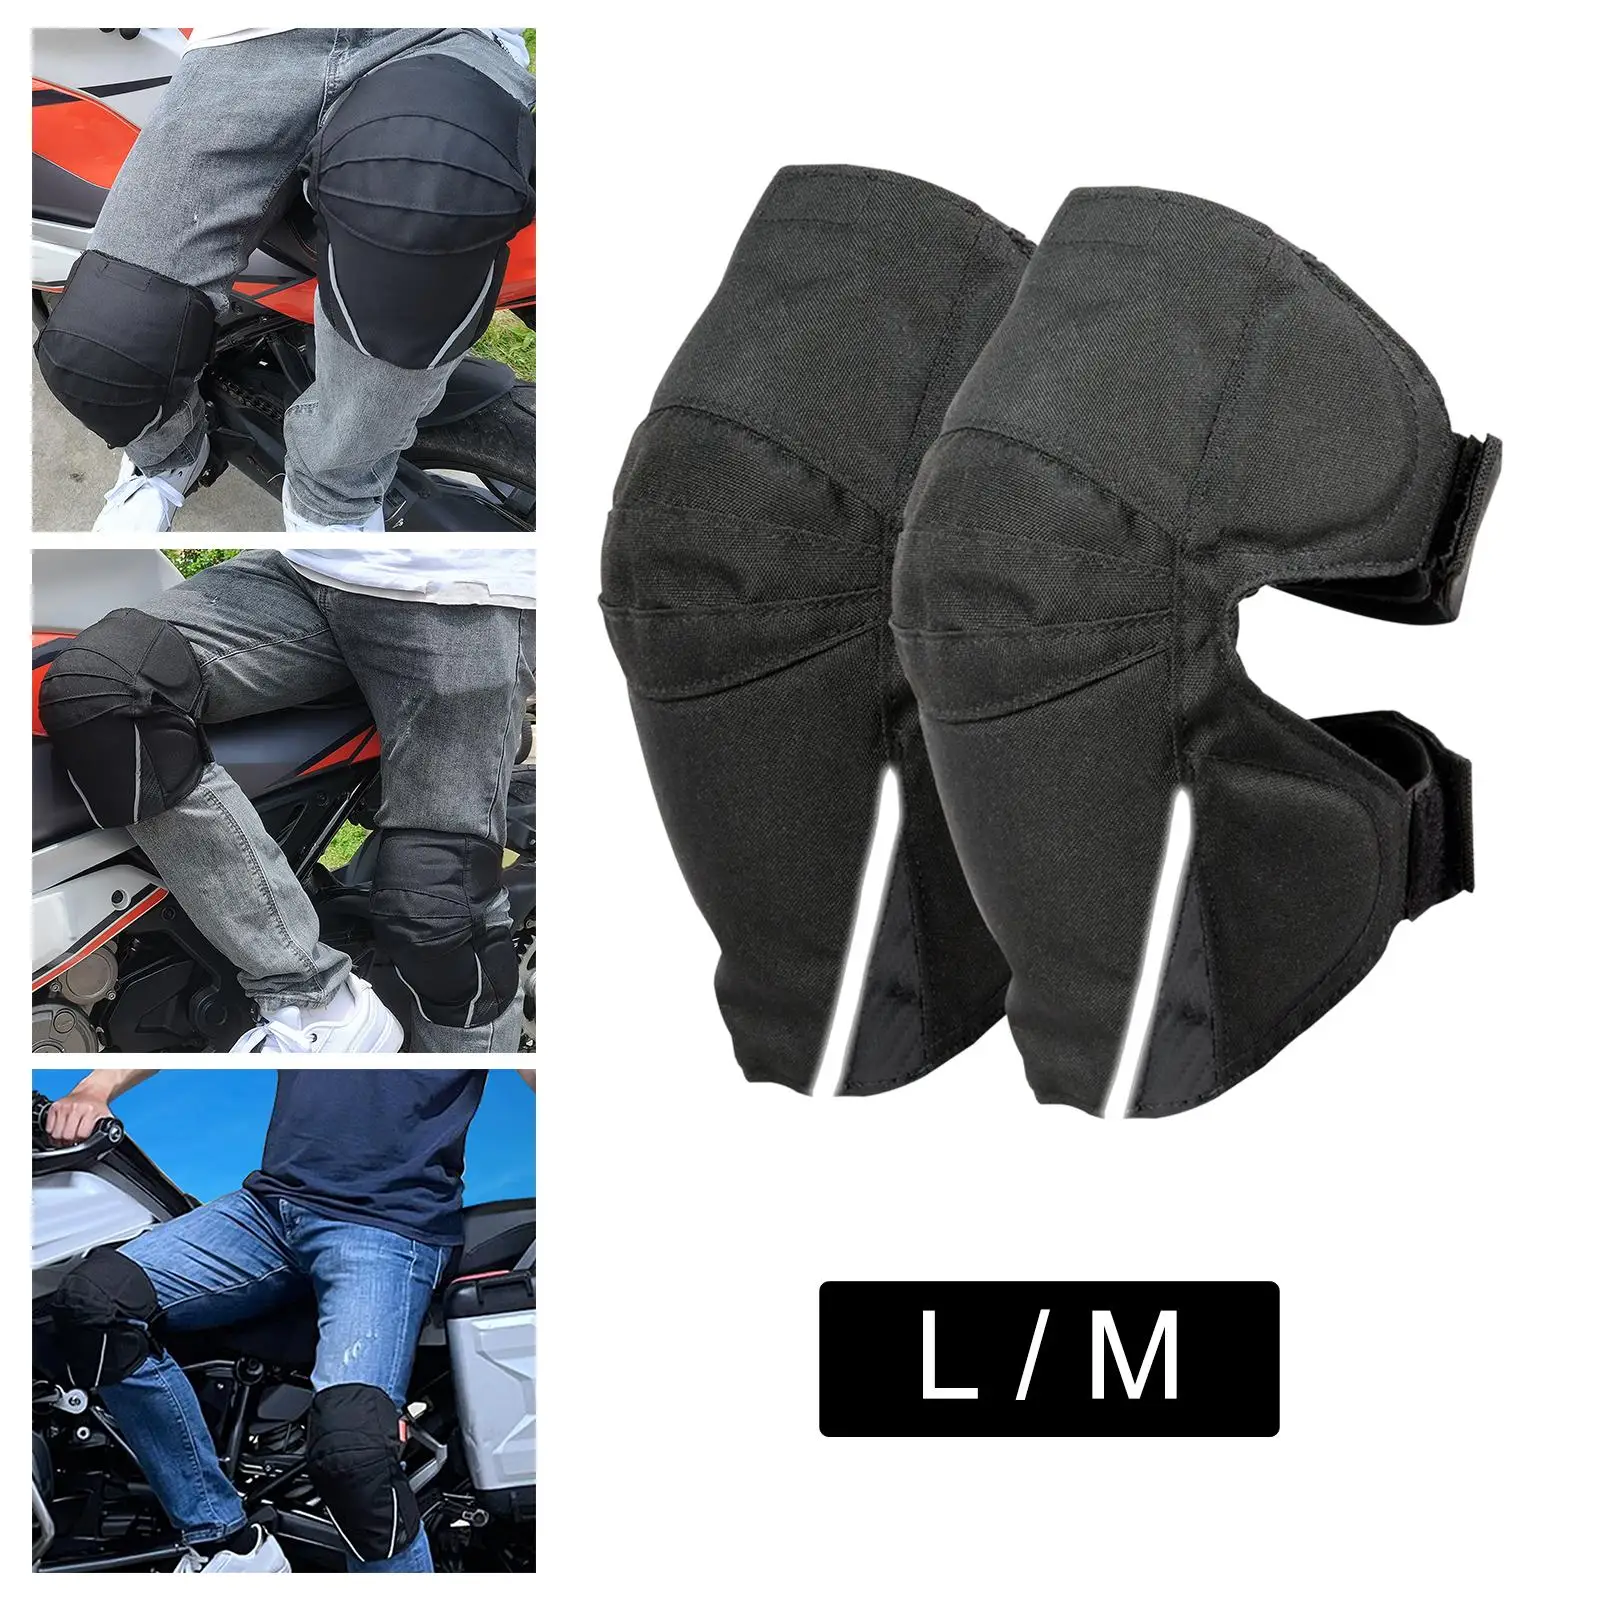 Professional Knee Pads Sports Protective Equipment Cushion Knee Support Brace Knee Protector Fits for Rollerblading Skate Bike